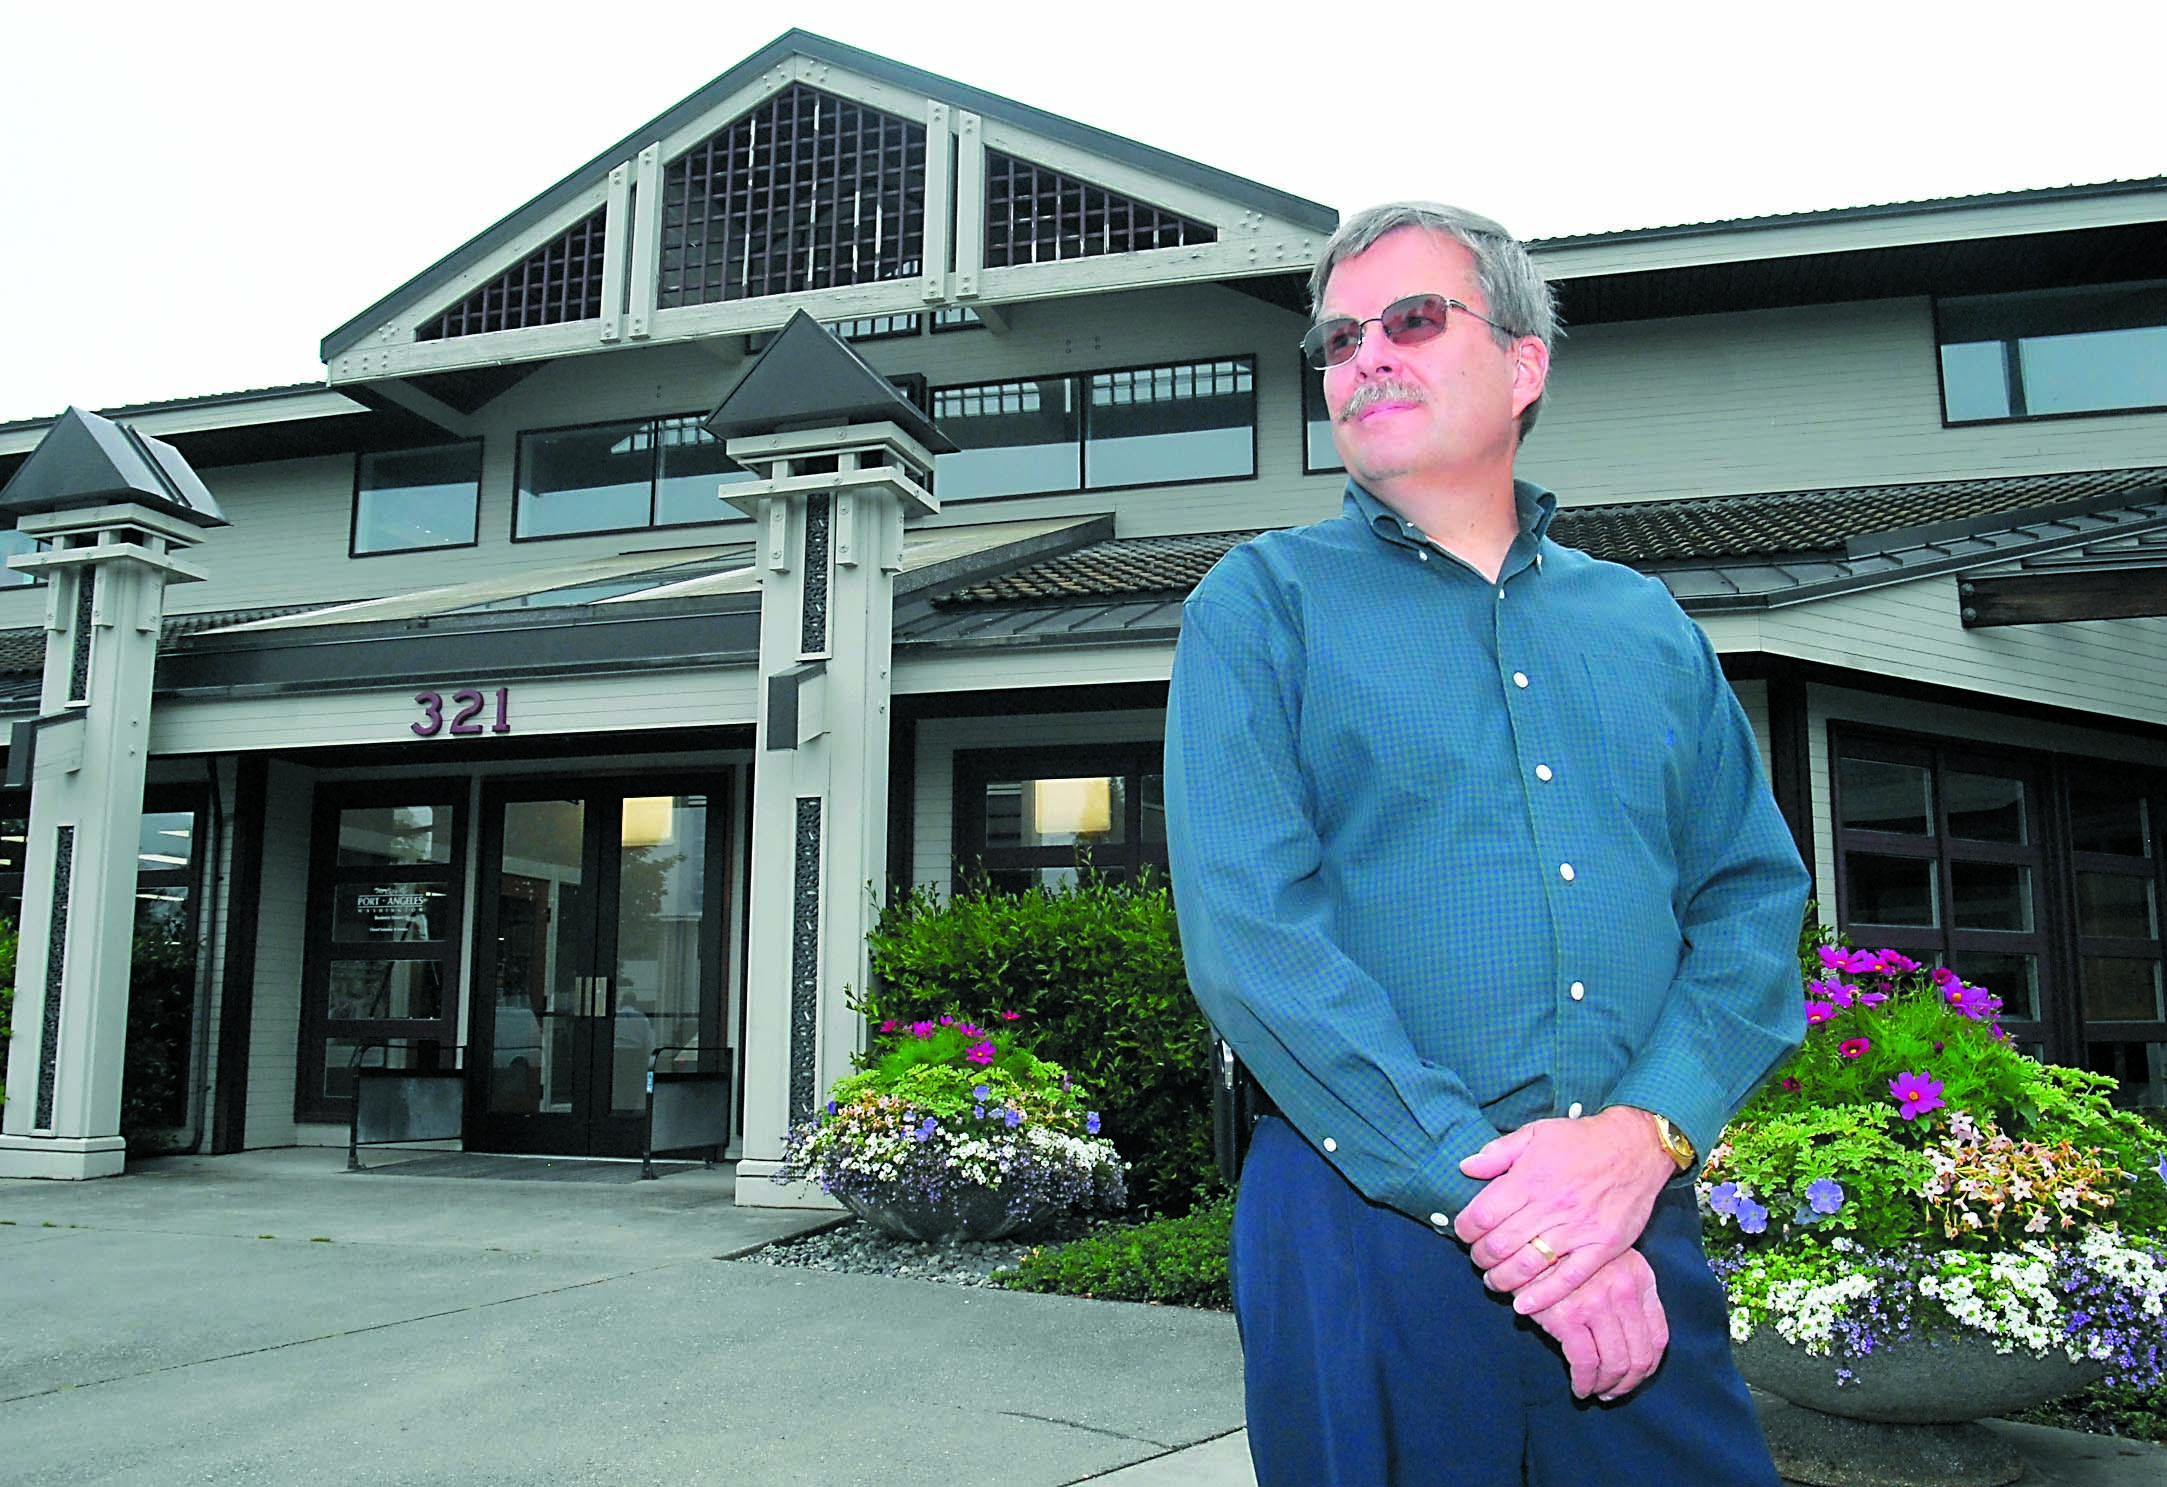 Dan McKeen stands outside of Port Angeles City Hall after his selection by the City Council for the post of permanent city manager Friday. Keith Thorpe/Peninsula Daily News